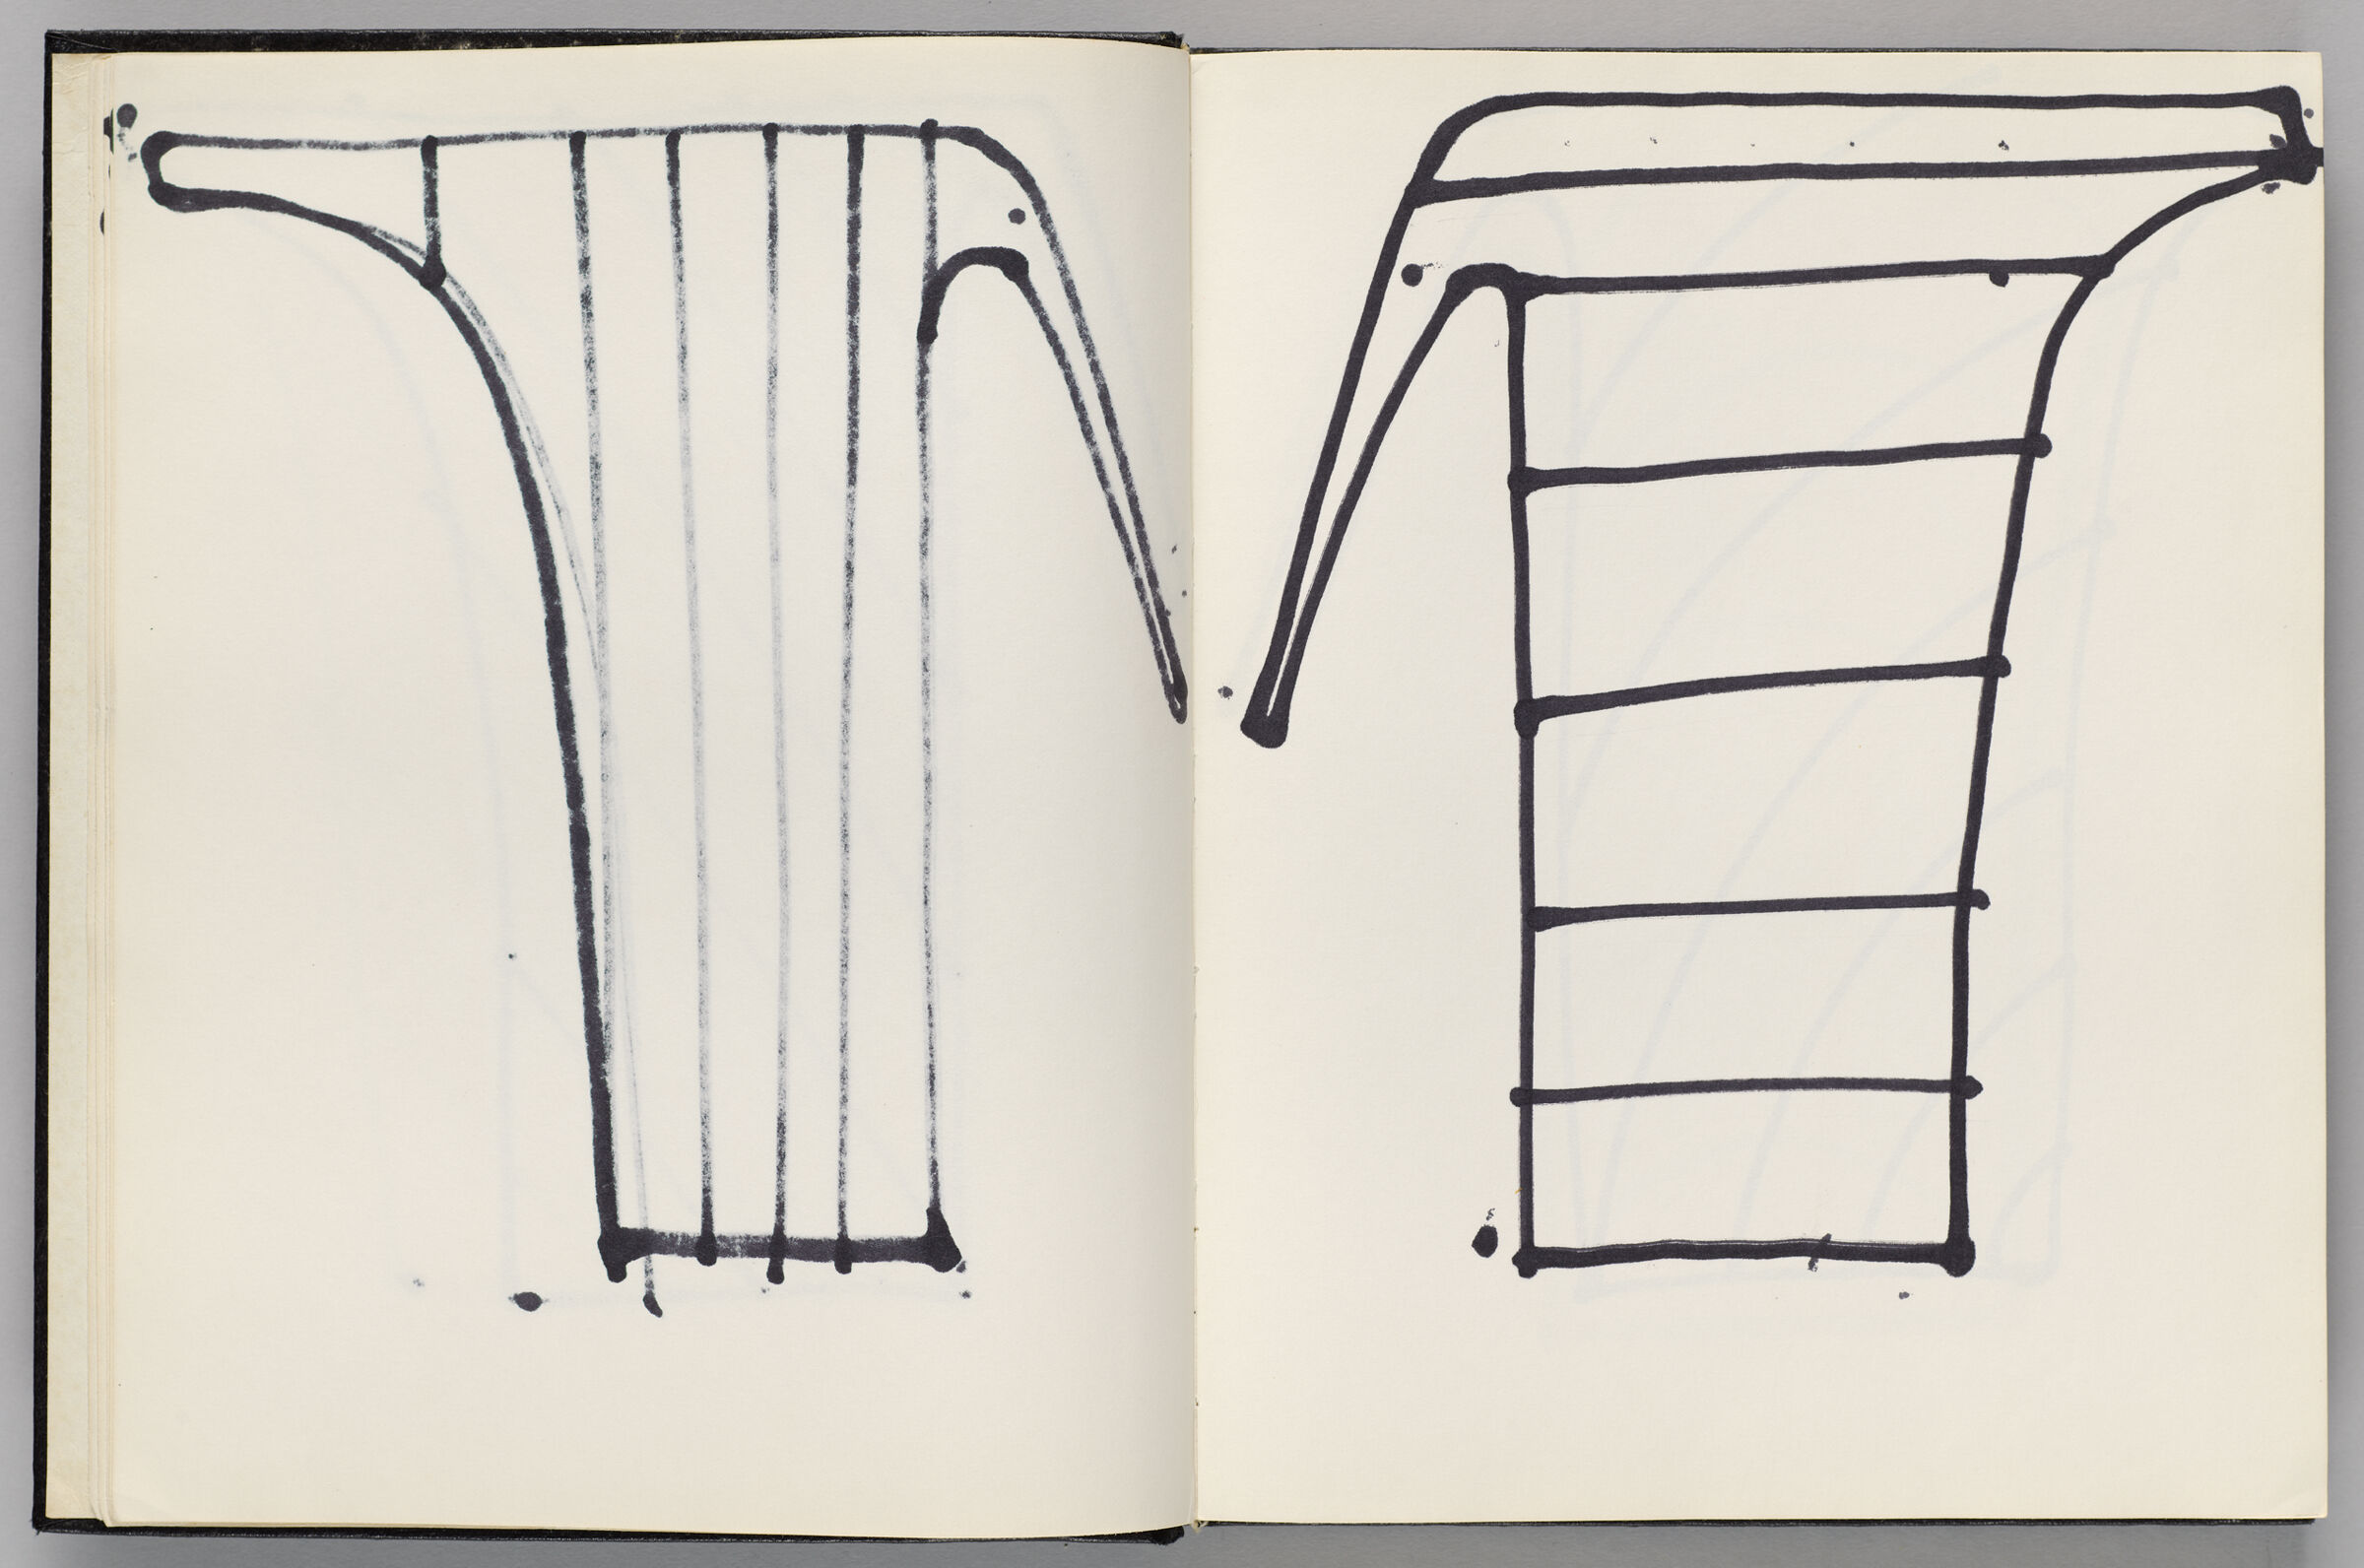 Untitled (Bleed-Through Of Previous Page, Left Page); Untitled (Ornamental Design For Coffee Pot (For Gropius' Rosenthal Design), Right Page)